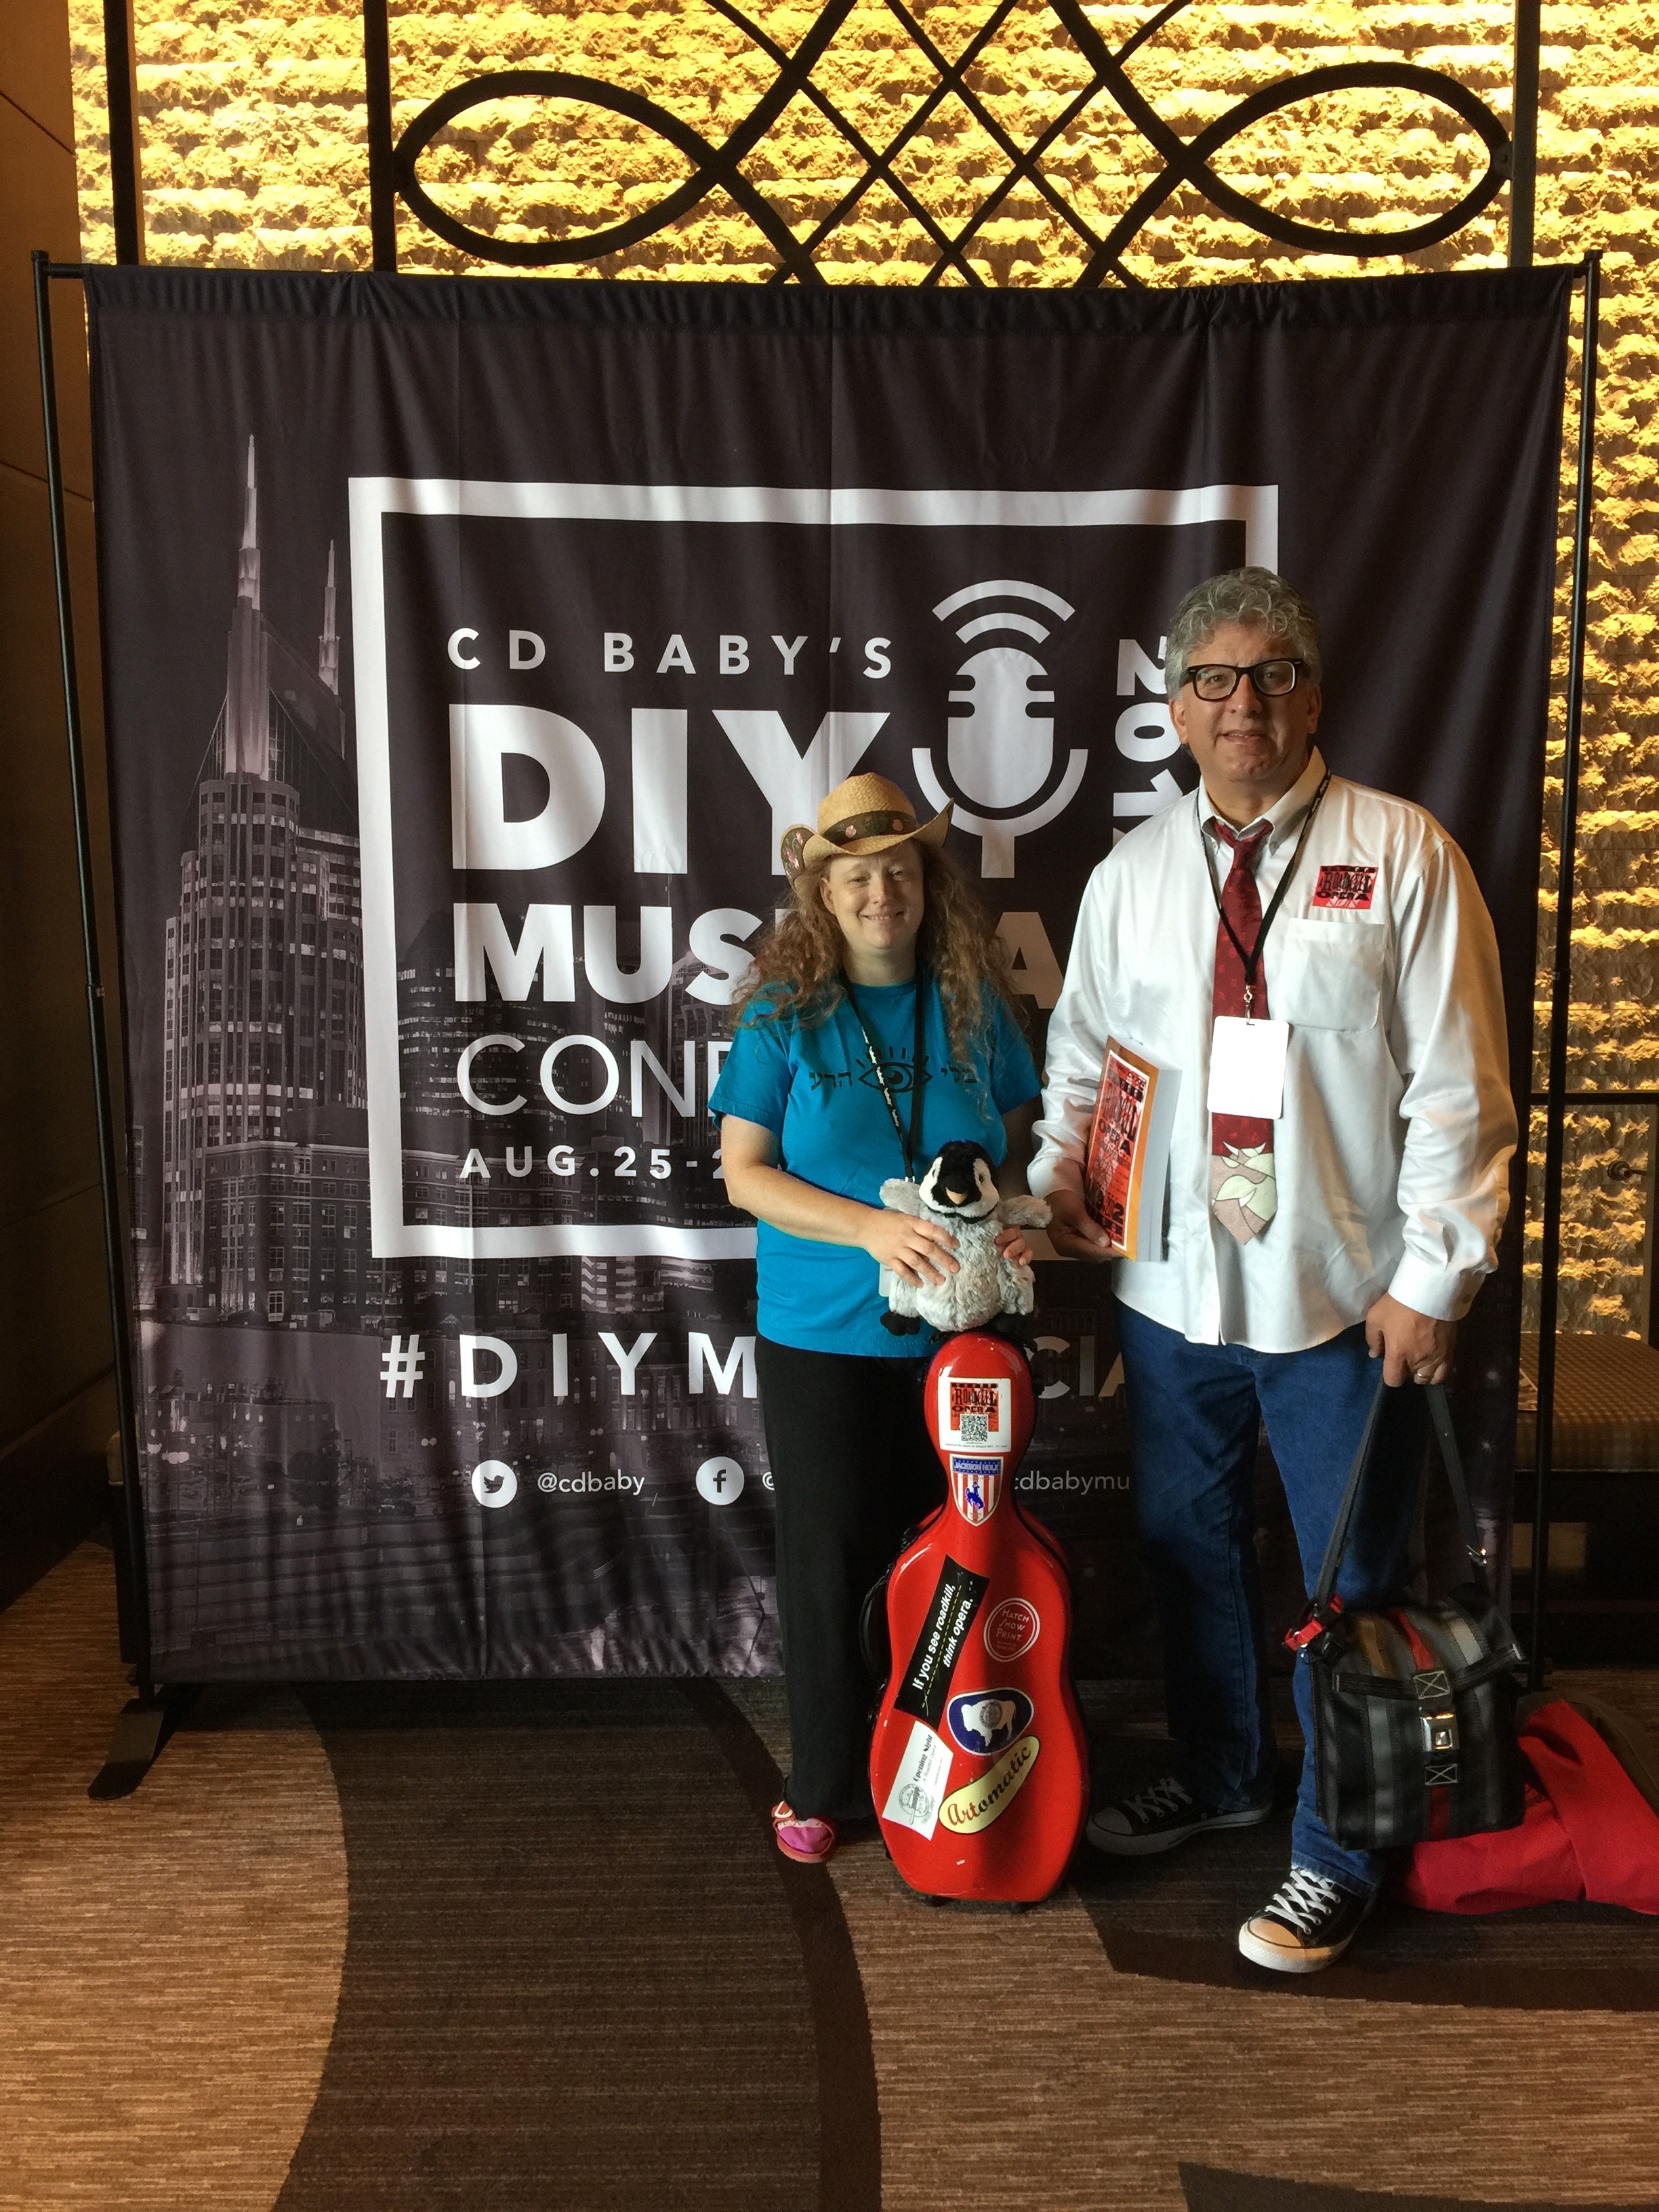 Photo of Artomatic artists Ashira and A Roadkill Opera's Stephan Alexander Parker at CD Baby's DIY Musicians Conference i2017 in Nashville, Tennessee